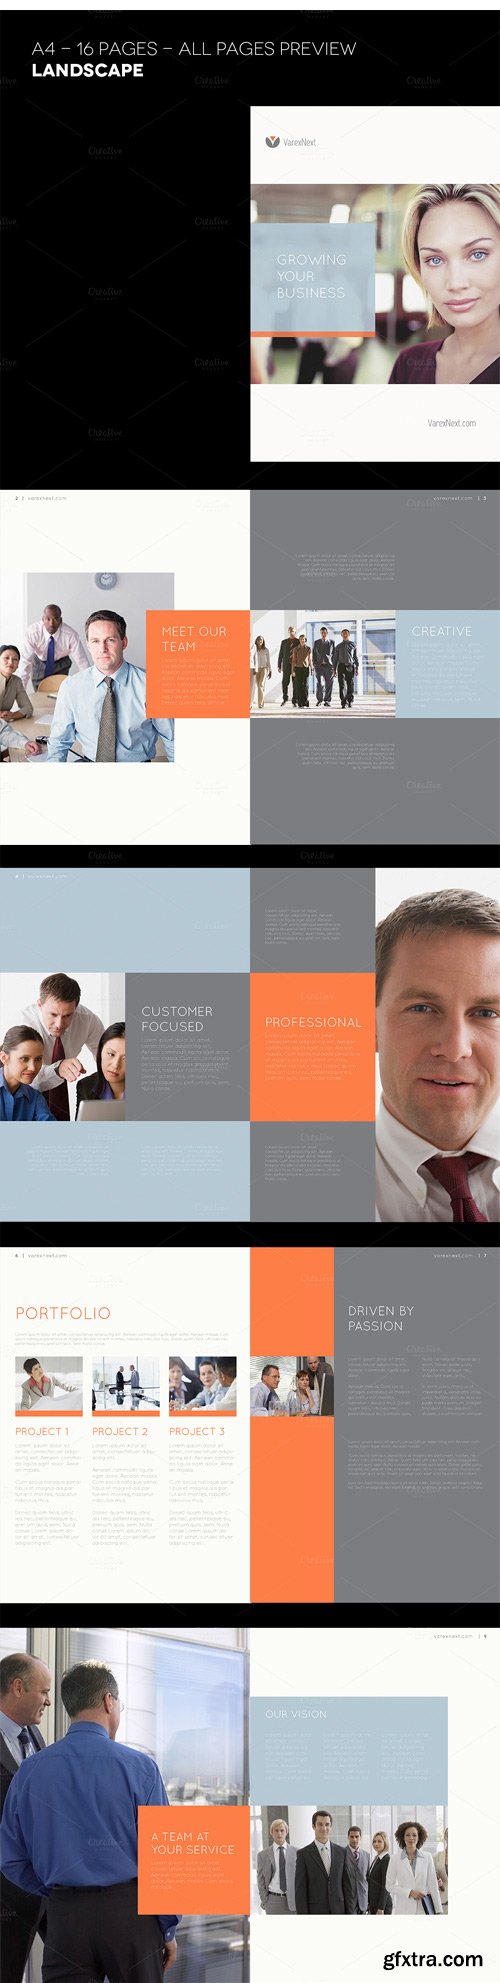 CM 301321 - Corporate Business Brochure 16 Pages